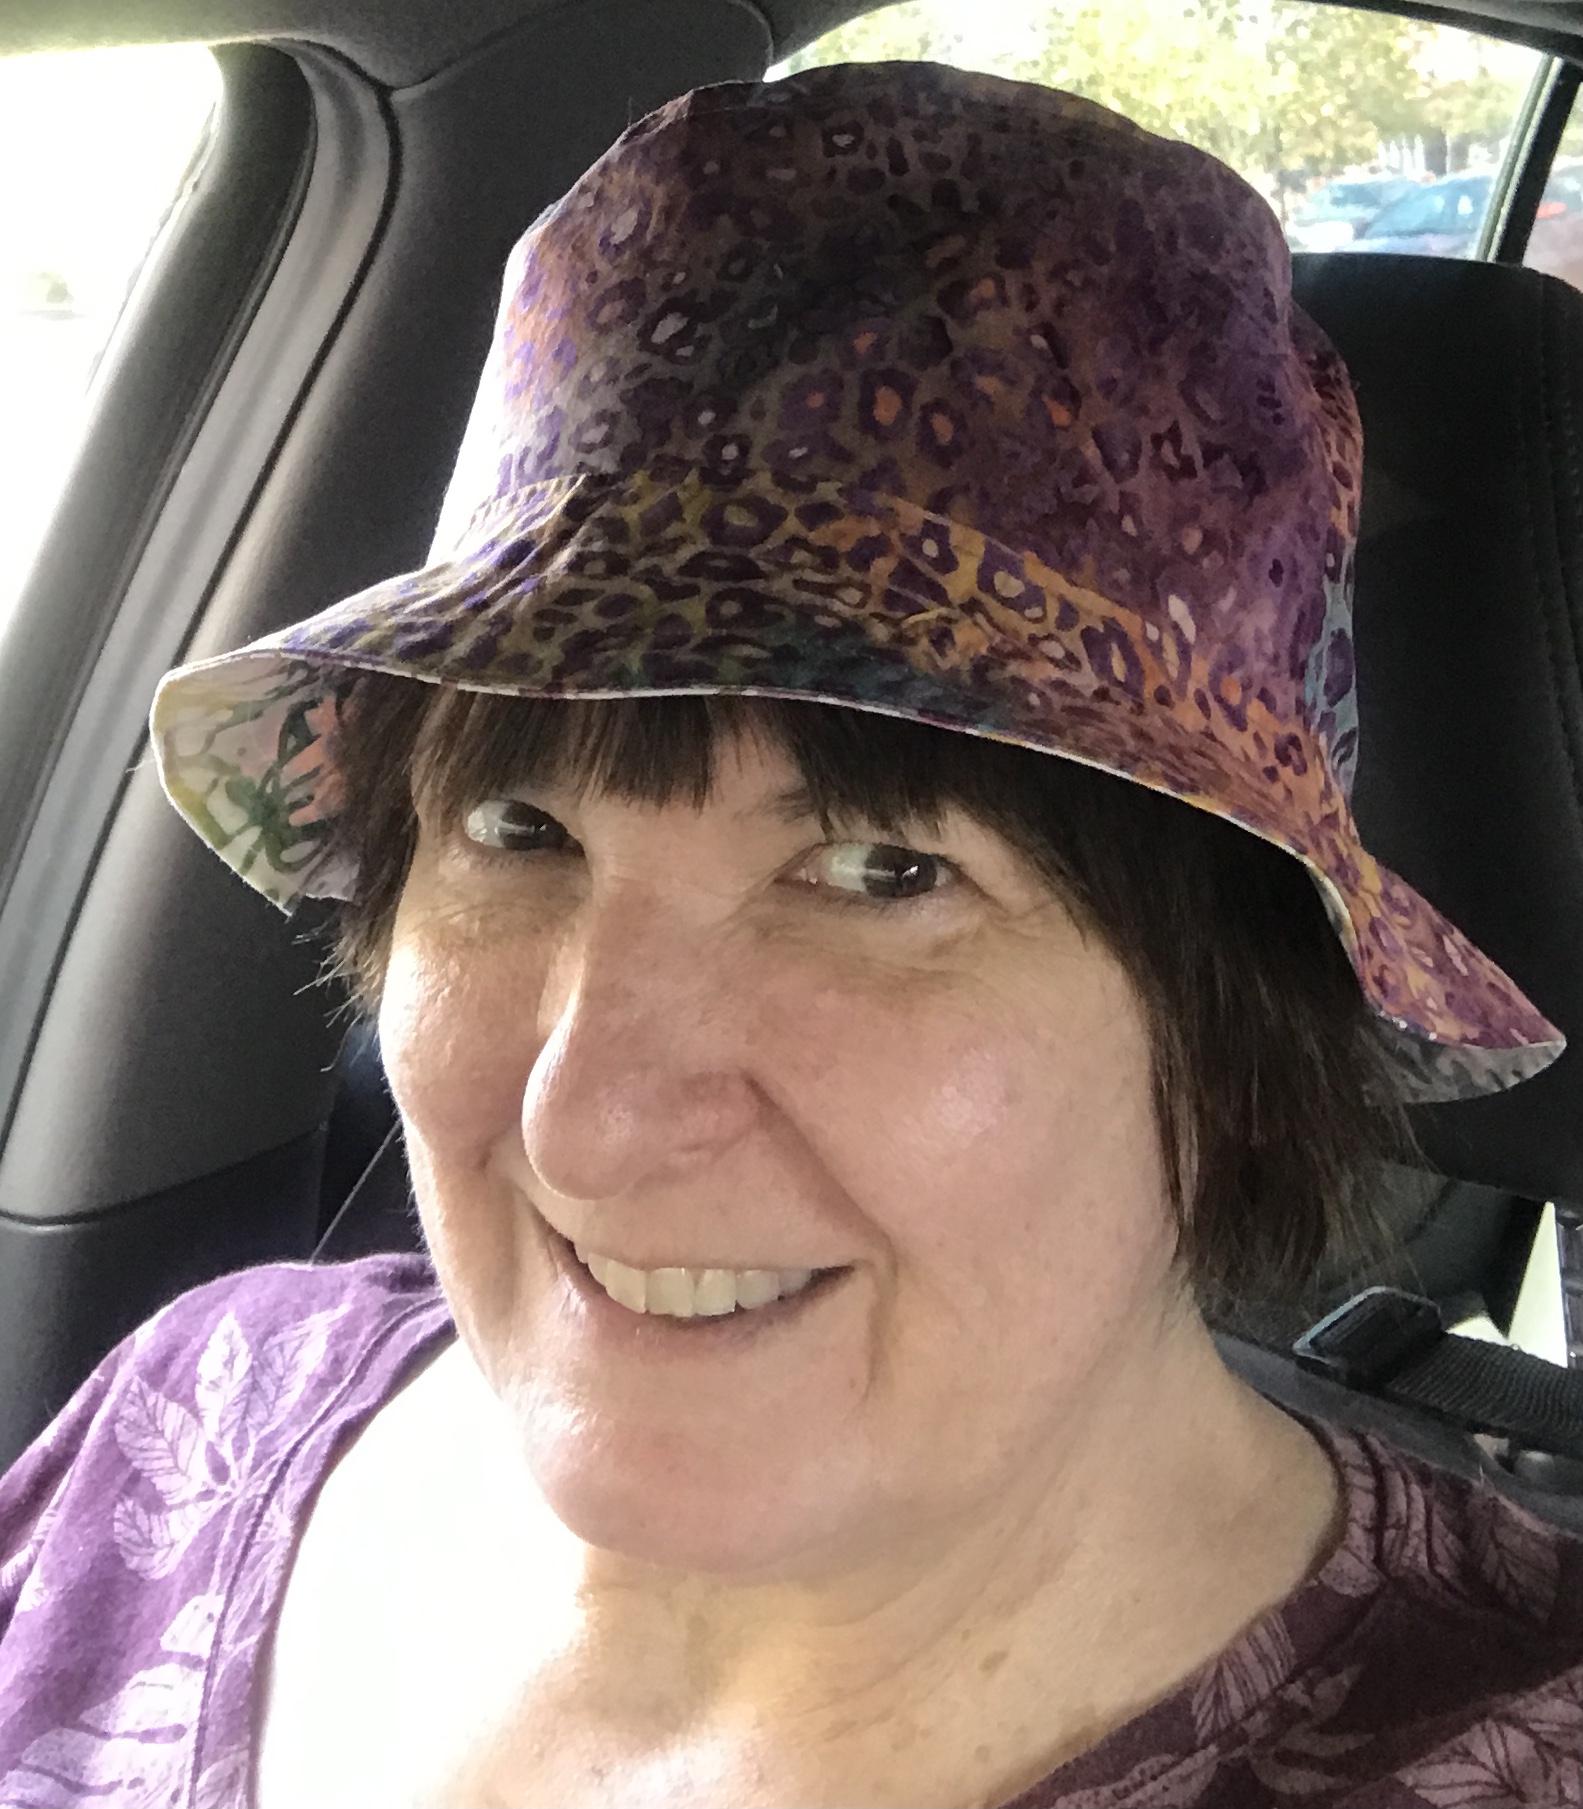 Adult woman wearing same hat in different fabric as an example